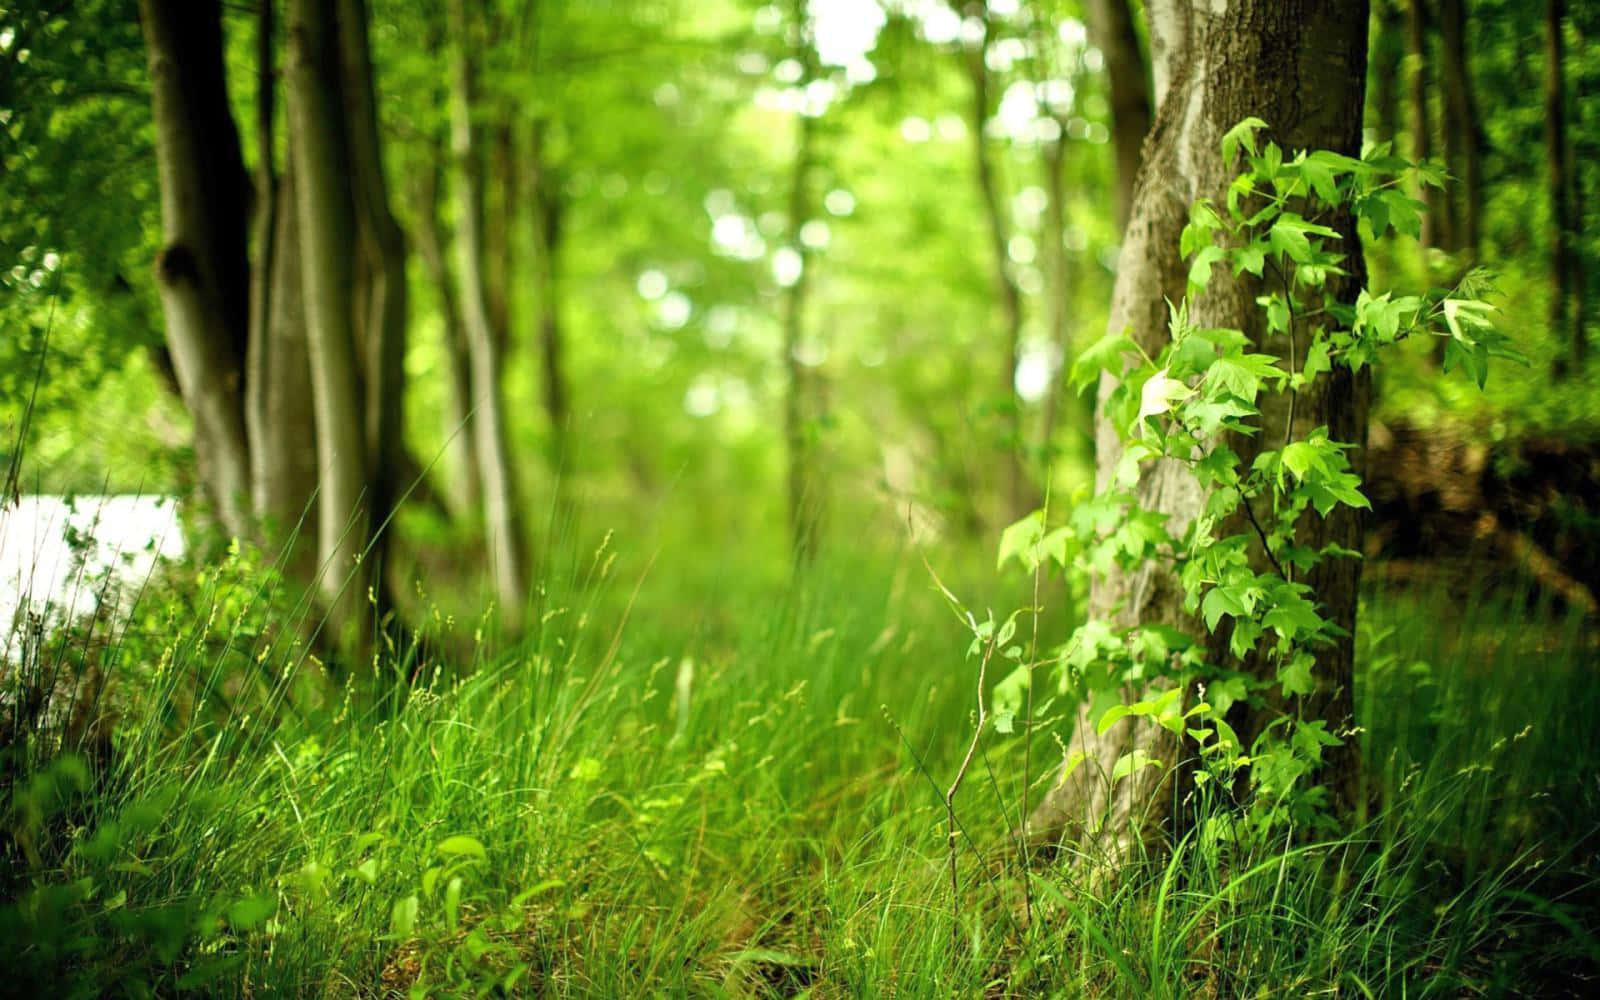 A calm and serene forest in warm and calming green shades Wallpaper